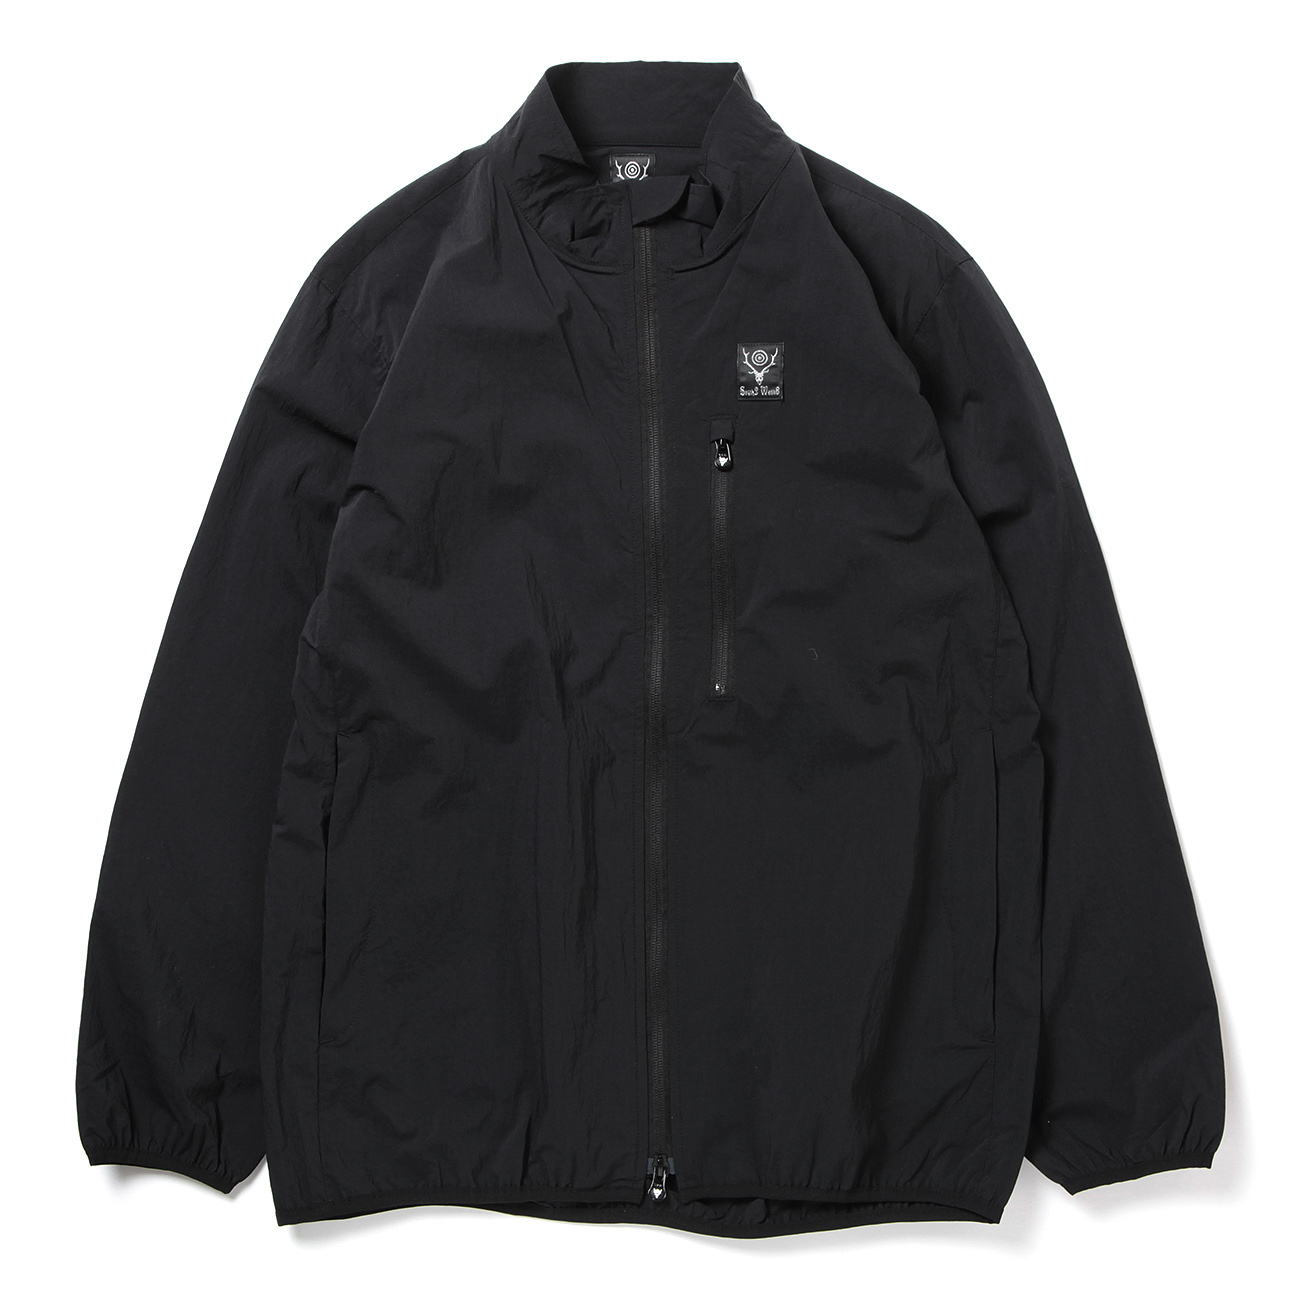 SOUTH2 WEST8 PACKABLE JACKET M ブラックナイロンジャケット